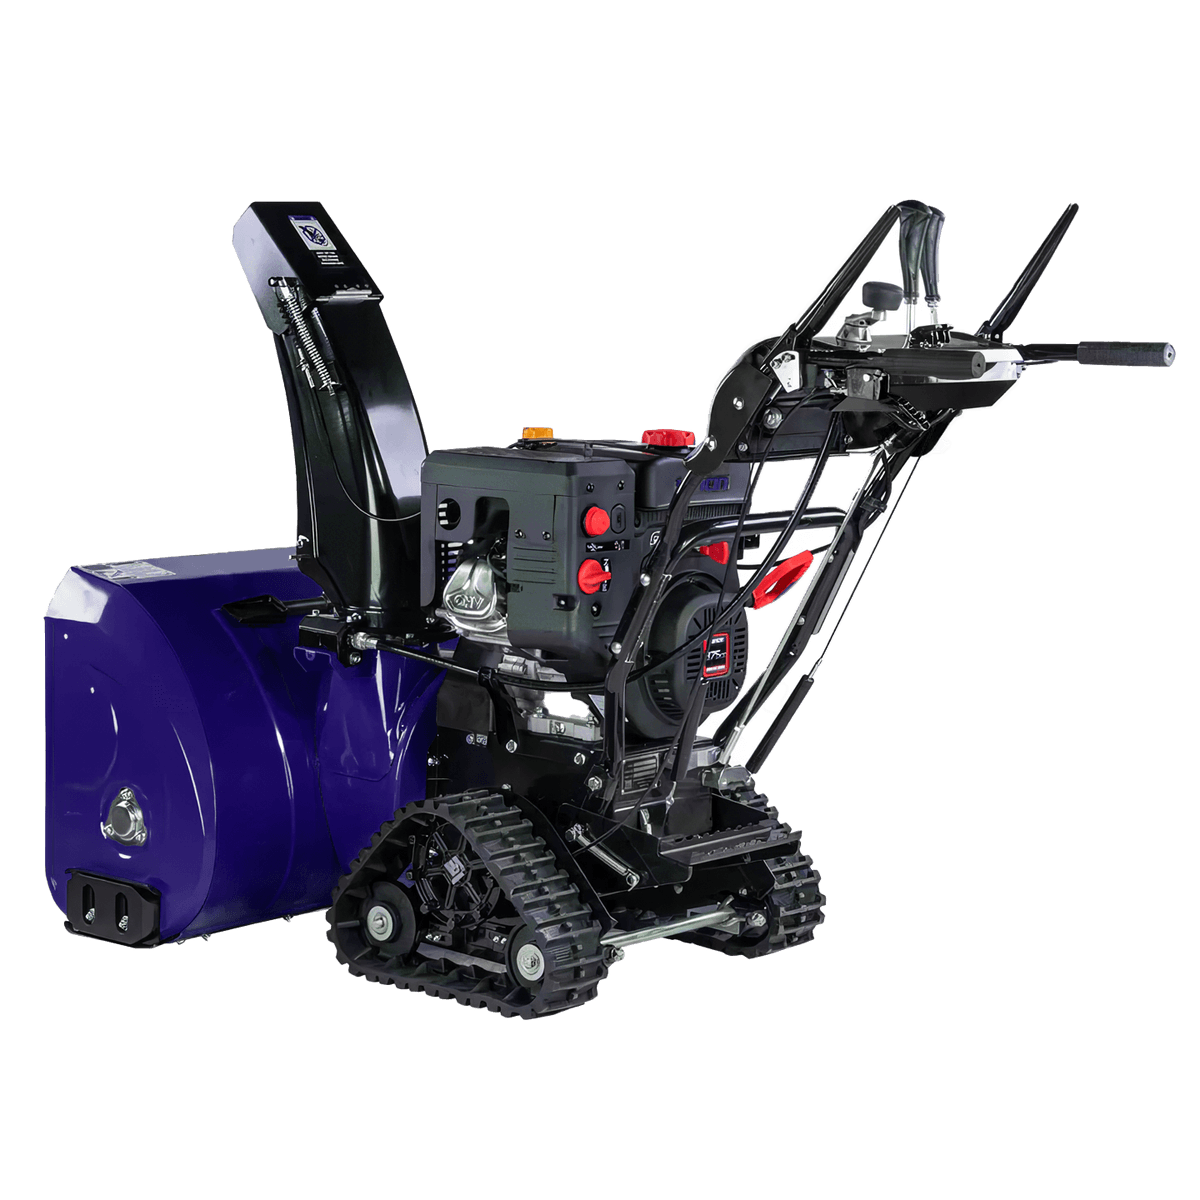 Value Industrial 34 inches Self-propelled Gas Powered Snow Thrower